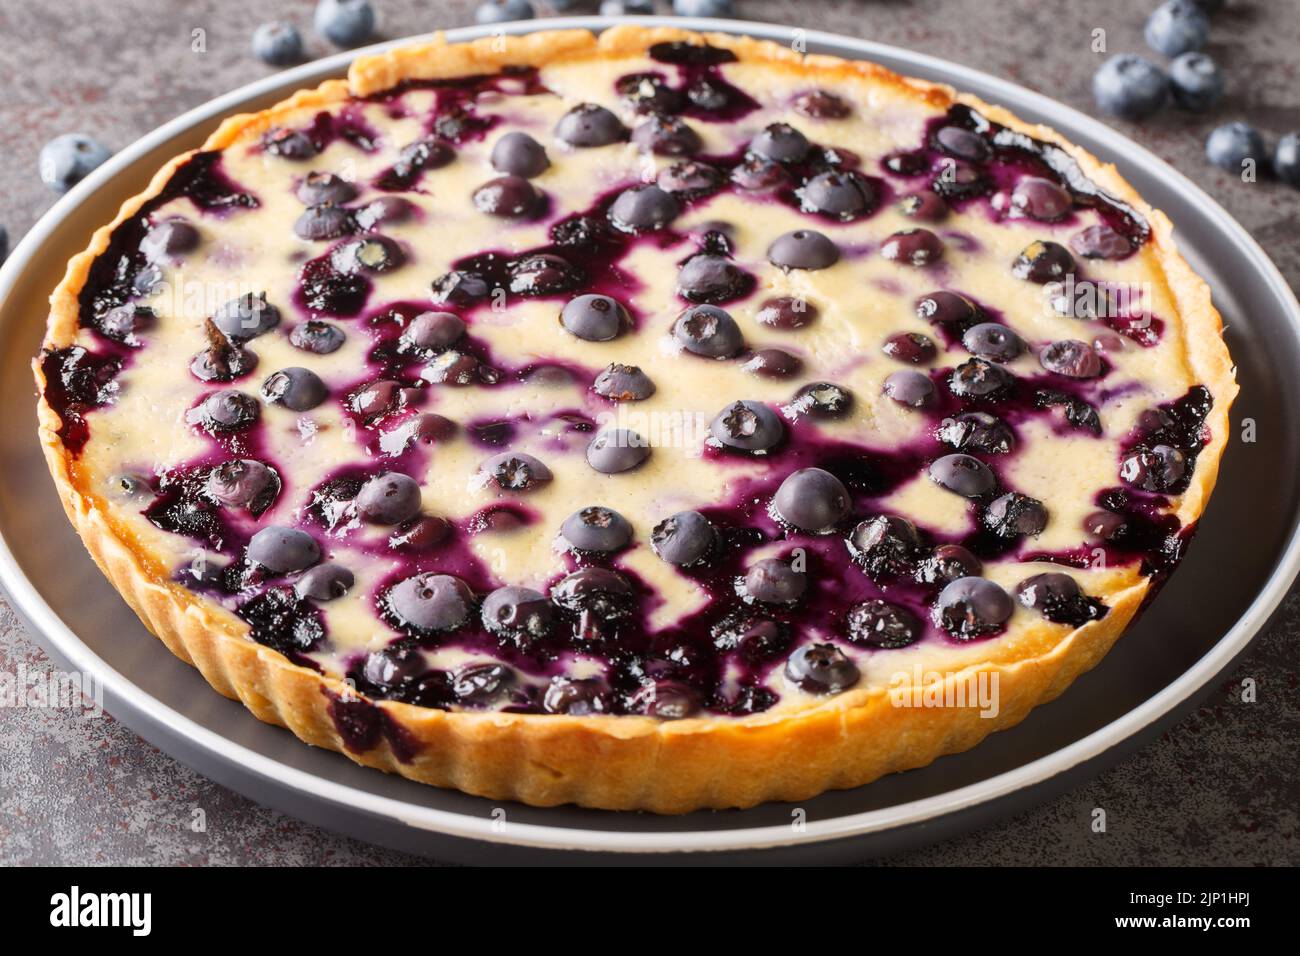 Homemade fresh blueberry tart with custard close-up in a plate on the table. Horizontal Stock Photo